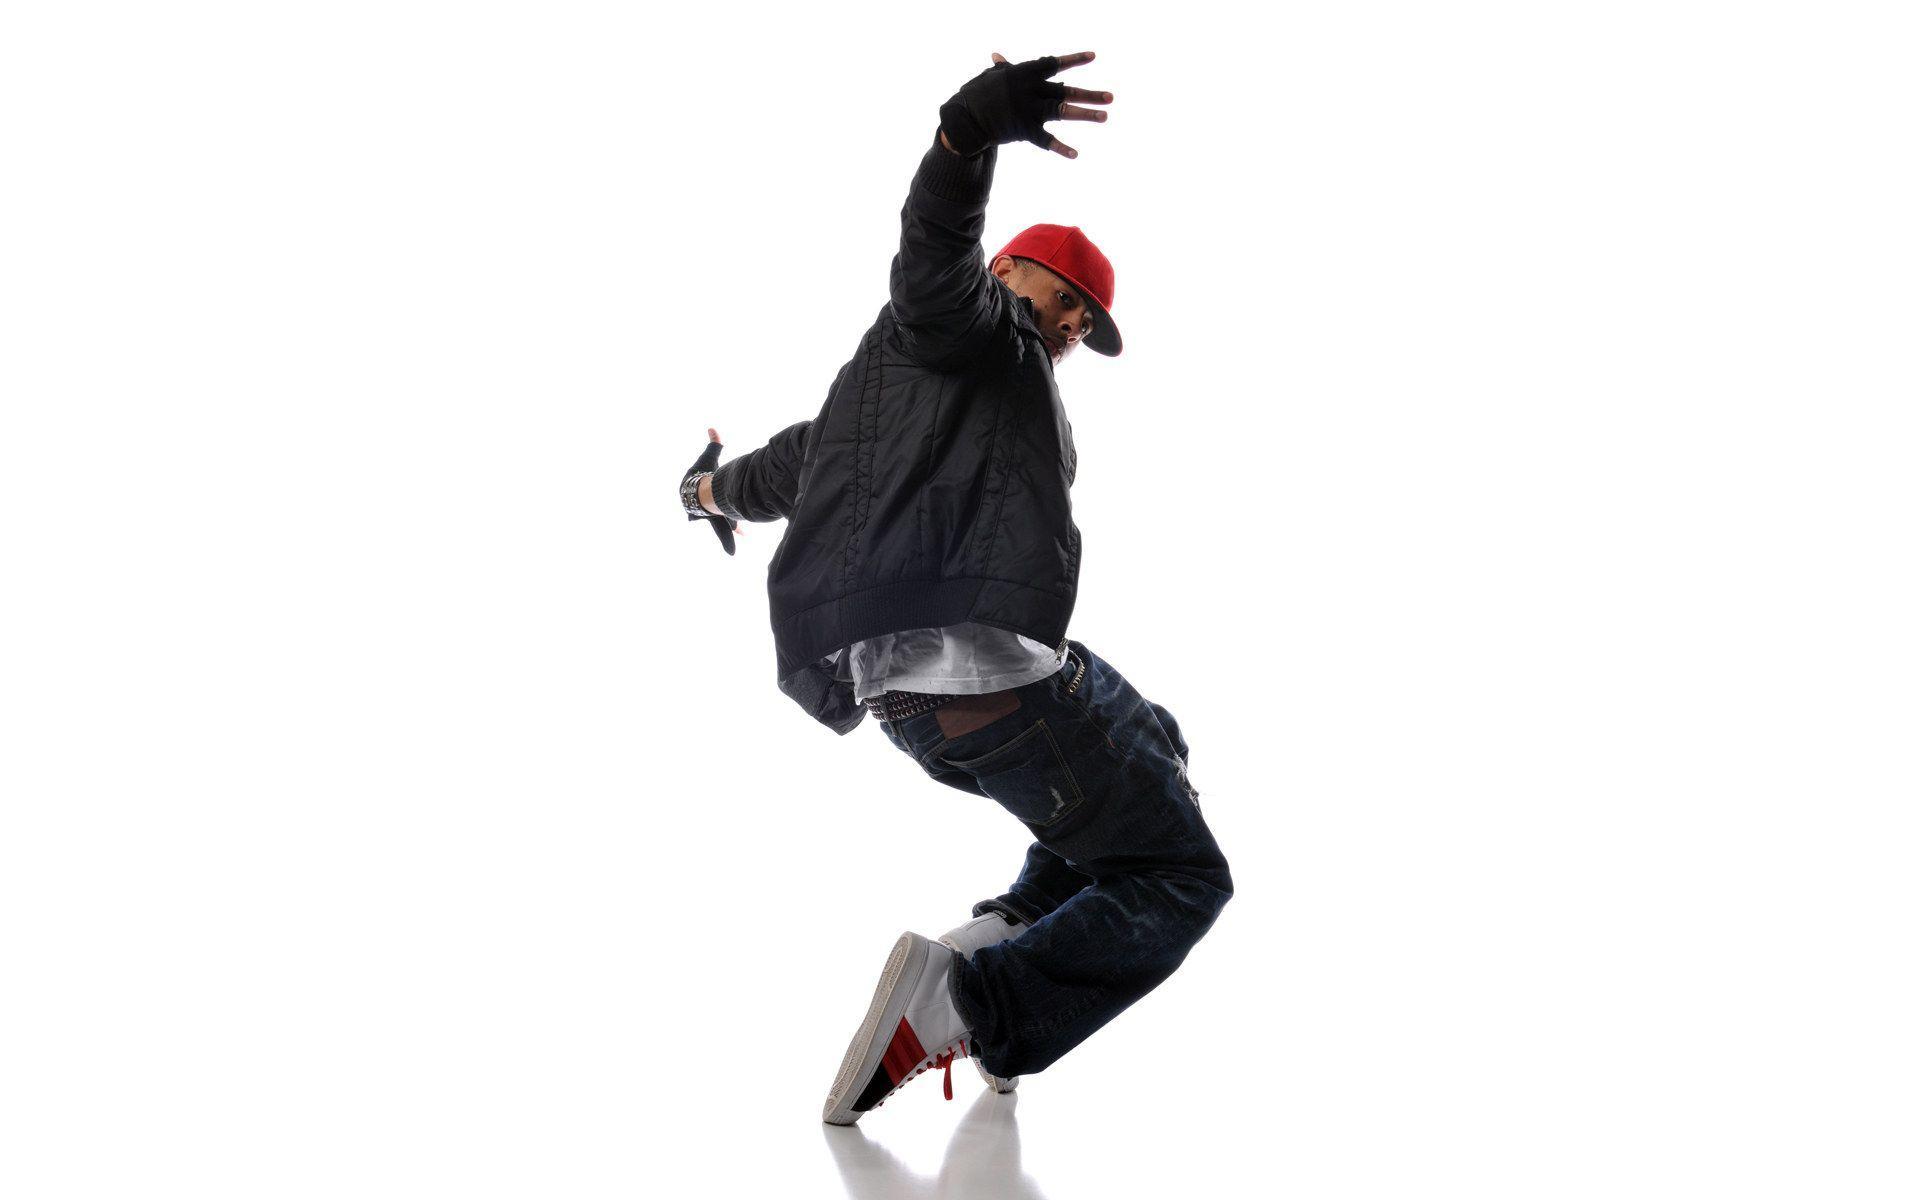 Rachid BBoY ReD. From: BaCk TO BaCk CREW